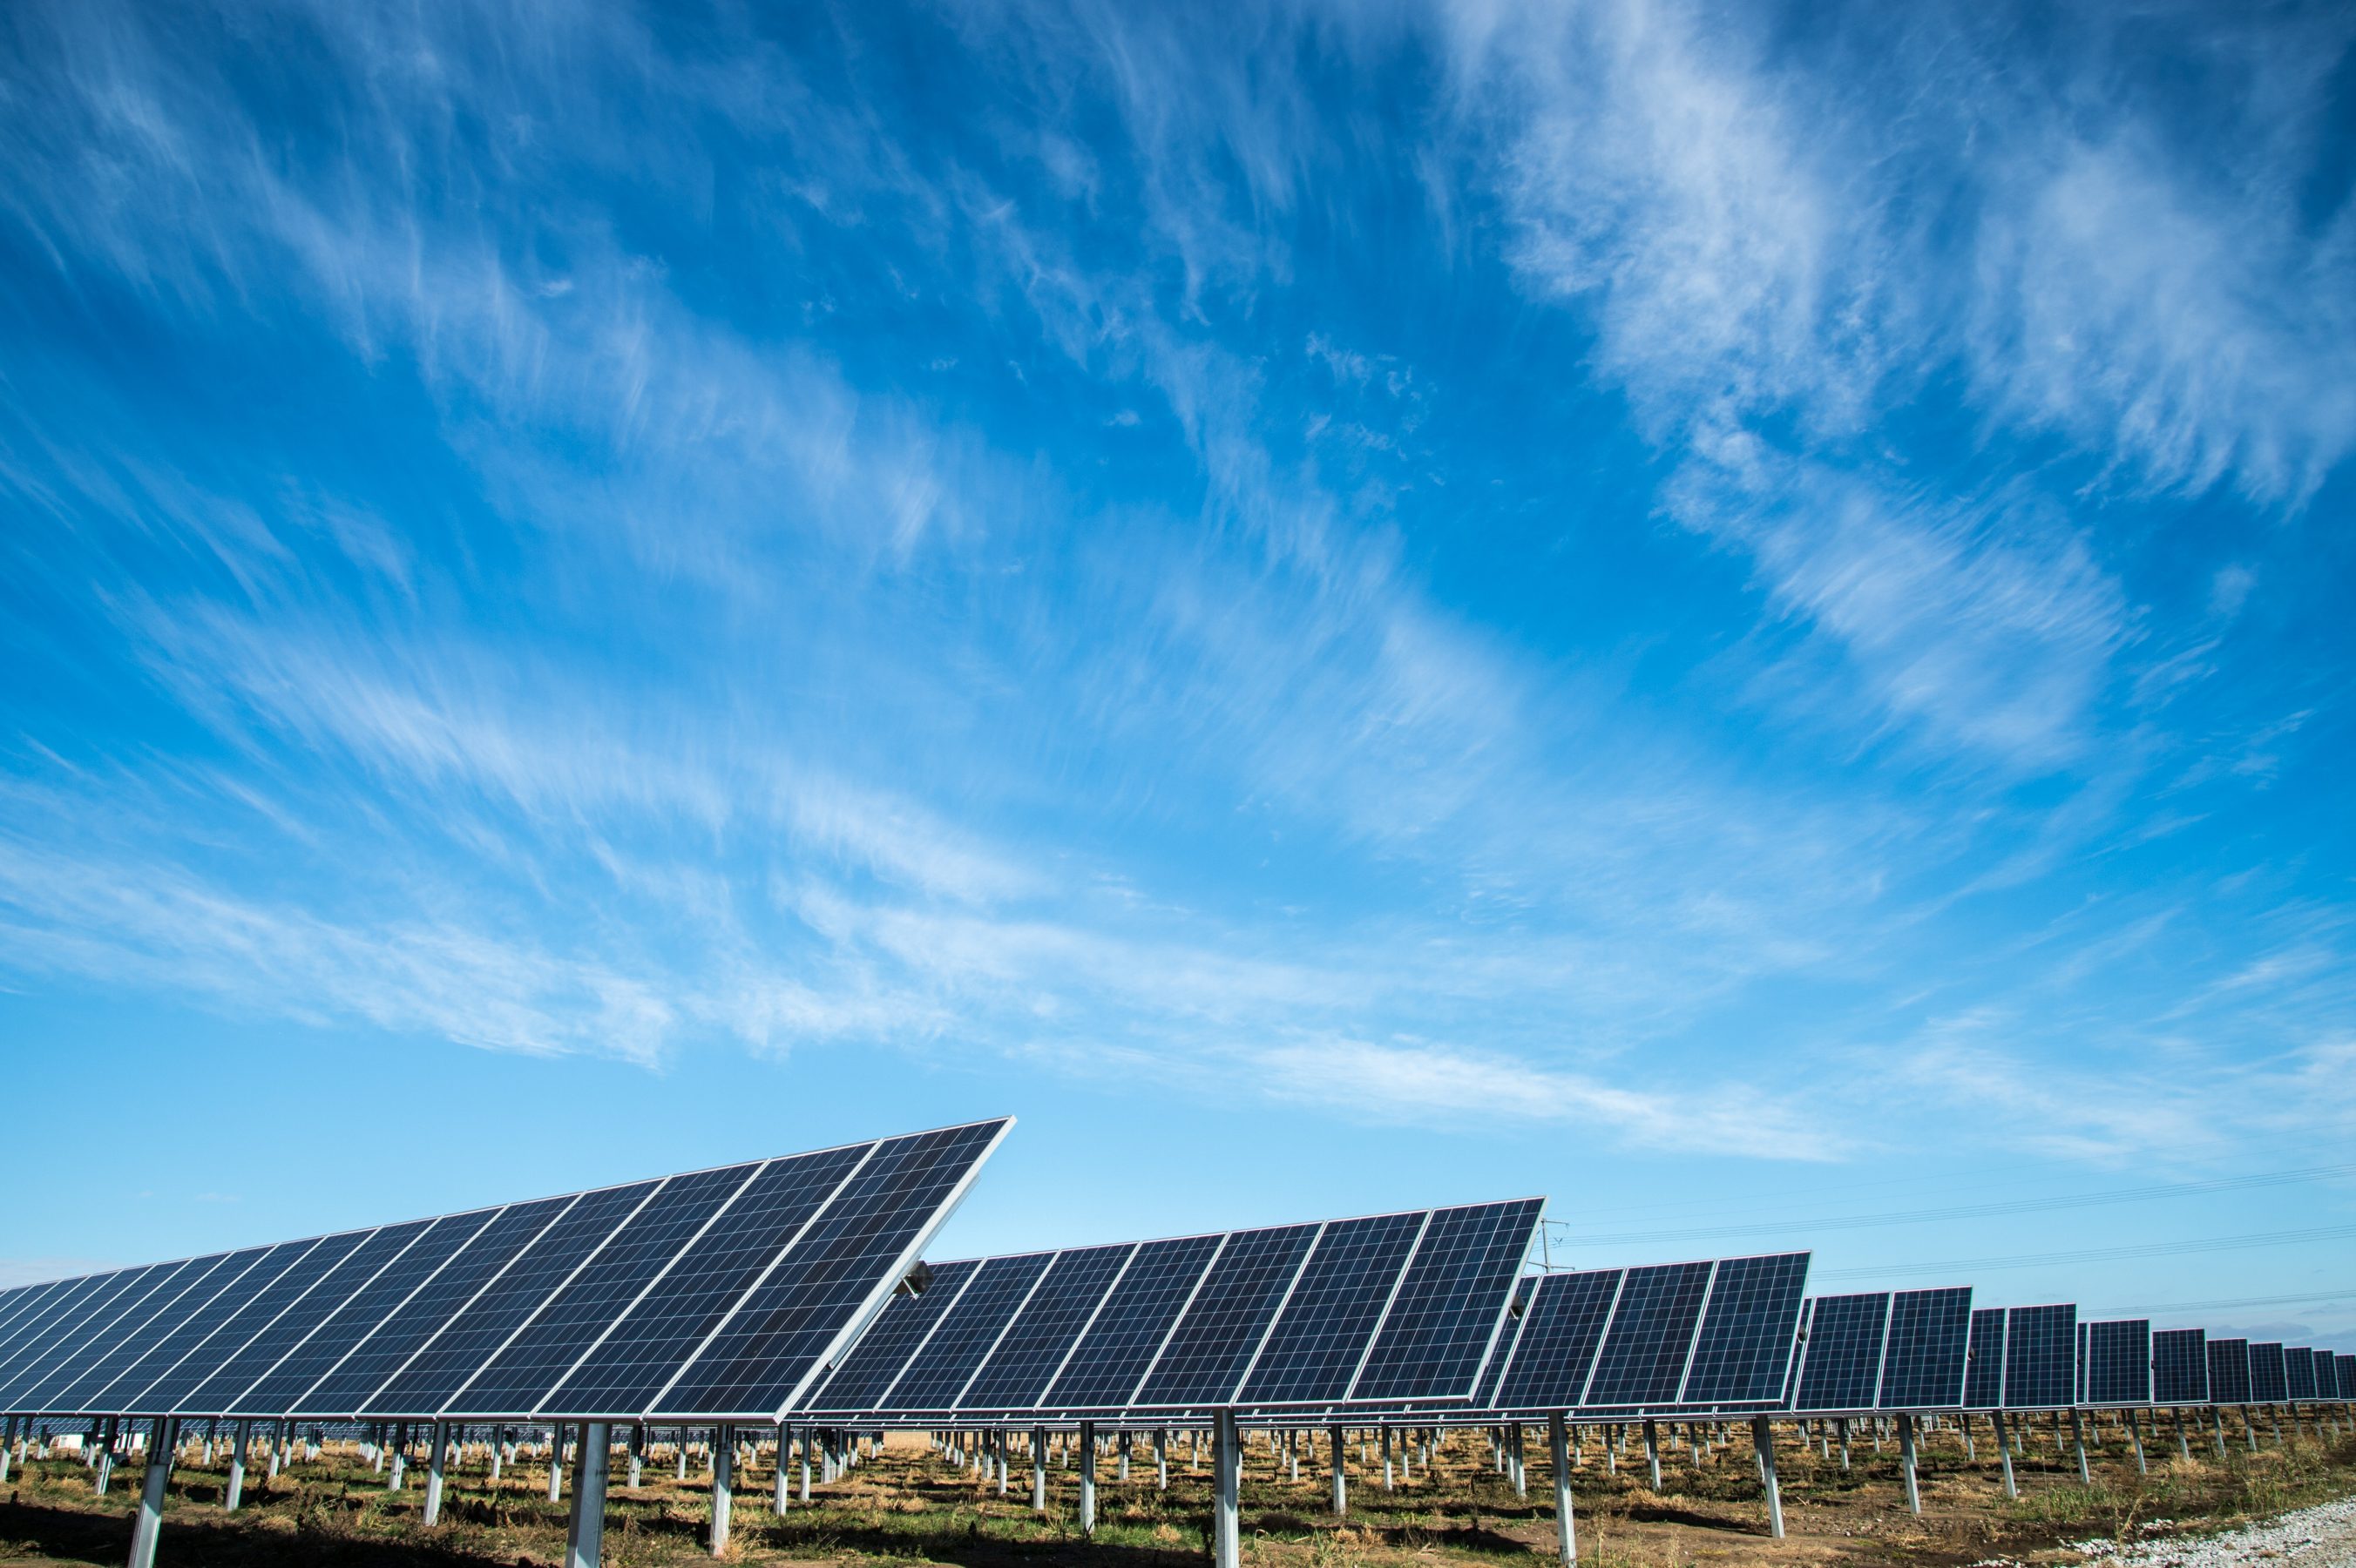  Solar energy storage projects in the US